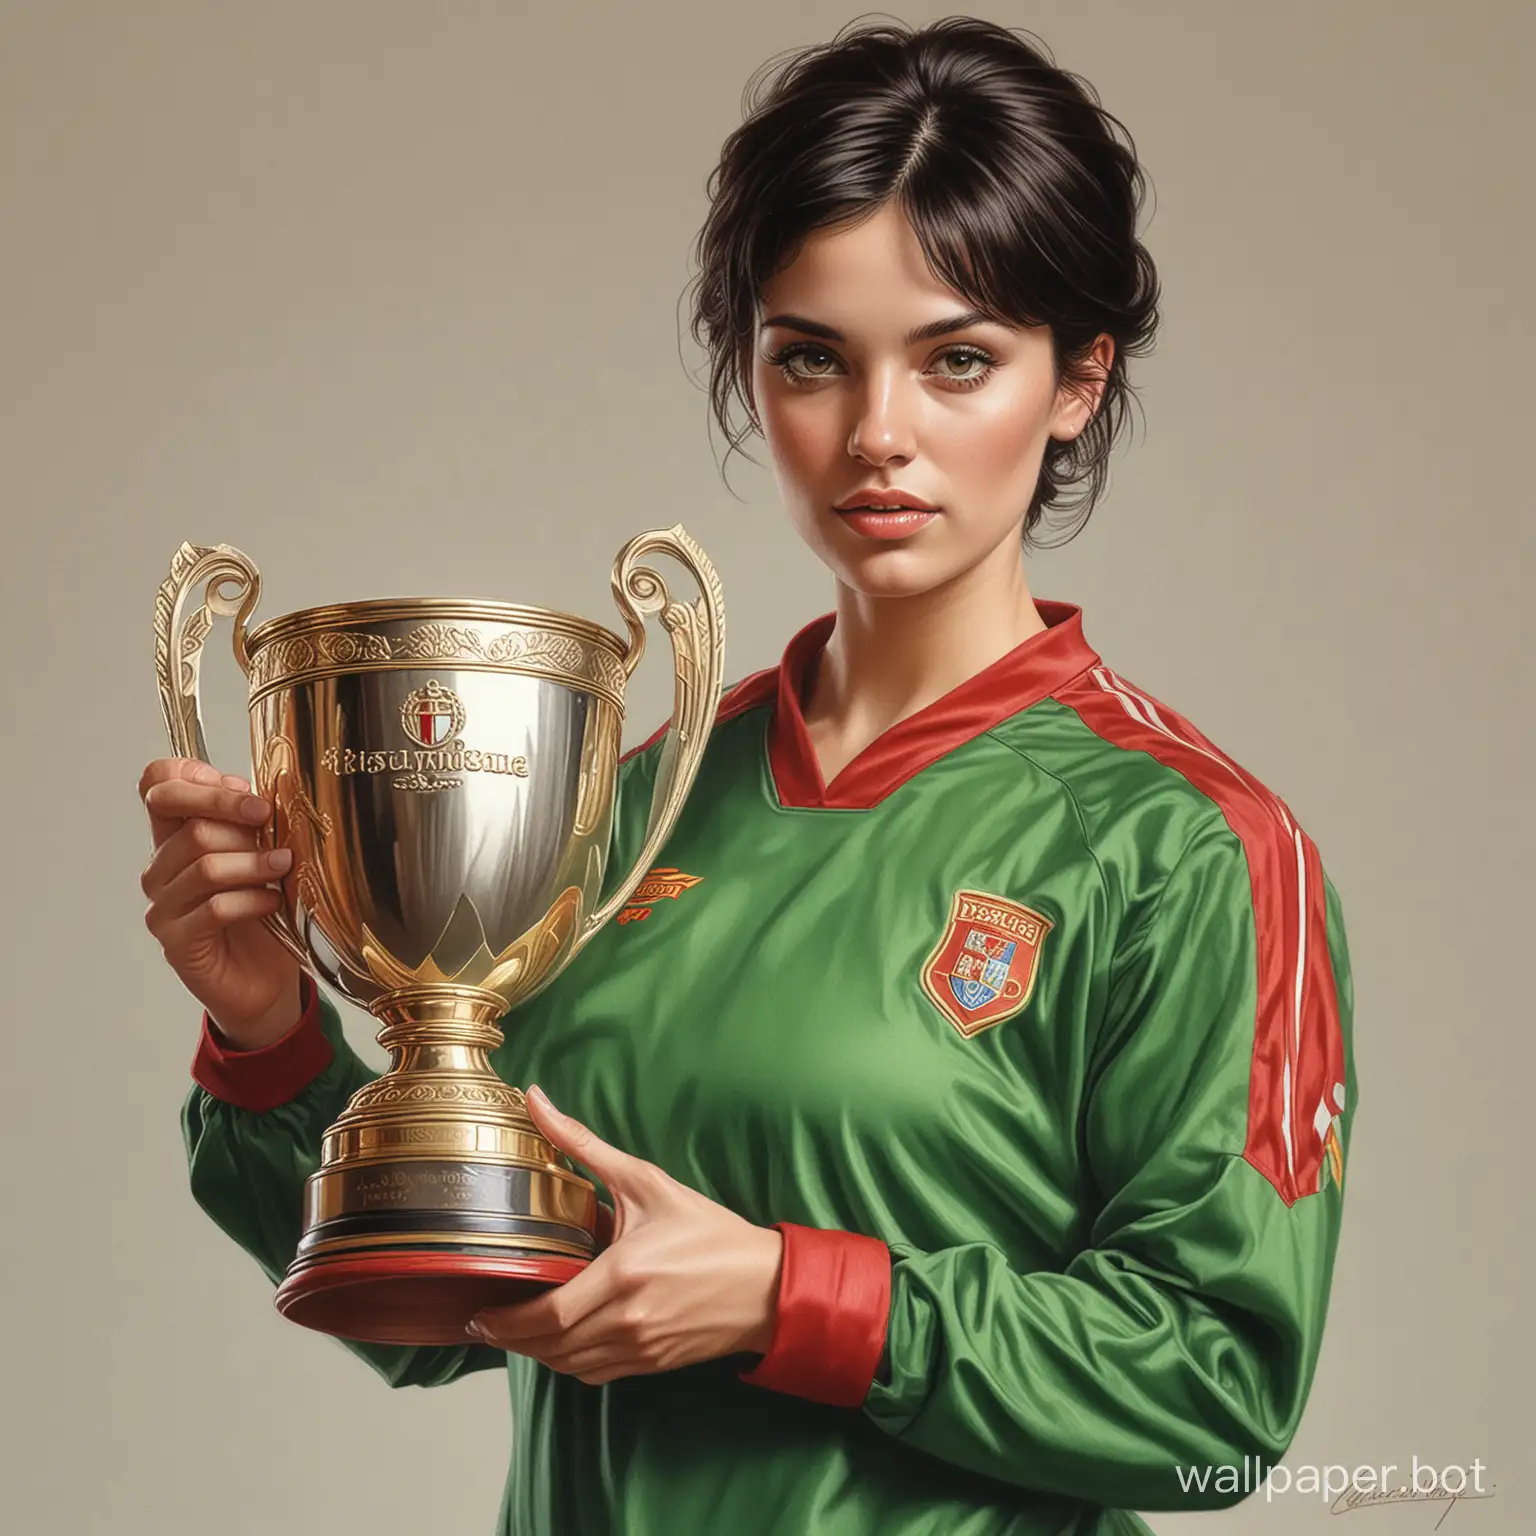 Sketch Elizabeth von Valentine, 25 years old, dark short hair, cup size 7, narrow waist, in green-red soccer uniform, holding the Champions Cup against a white background, very realistic drawing in colored pencil. Style Boris Vallejo.